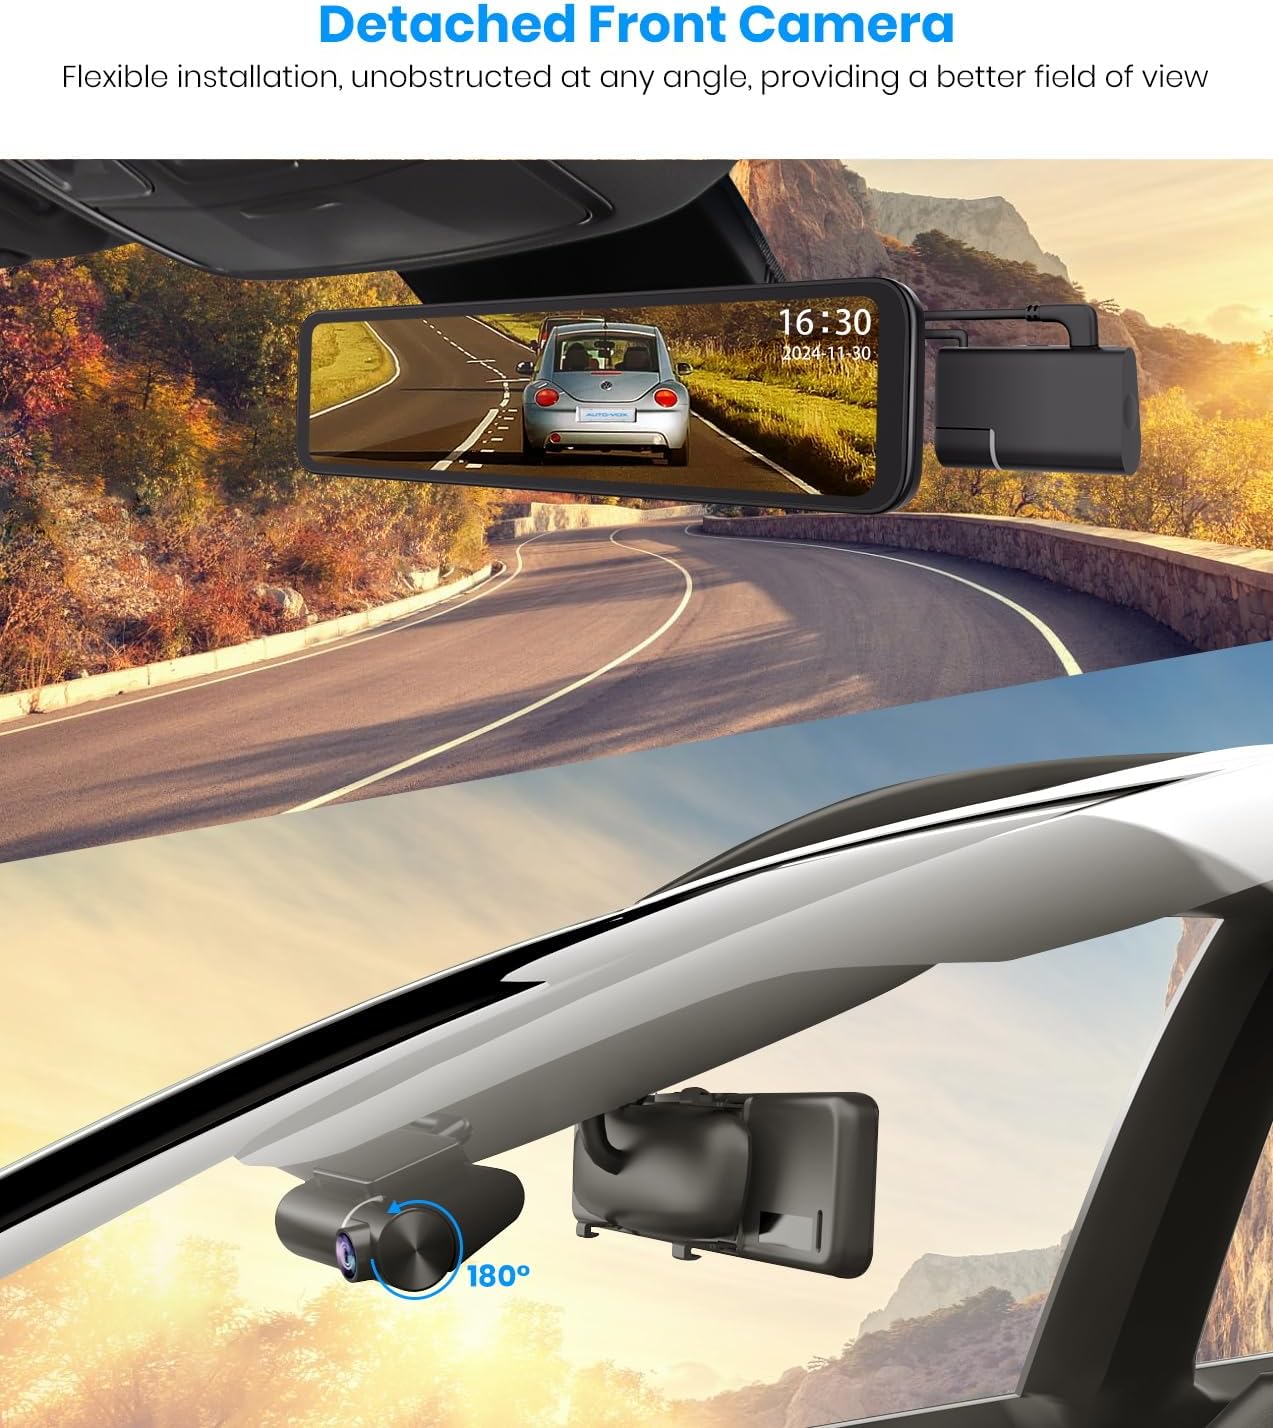 AUTO-VOX X7 Rear View Mirror Camera With Detached Front Camera, 11.88''Zoomable 2K Touch Screen Mirror Dash Cam,Rear View Dual Backup Camera for Car, Night Vision, Parking Assistance & GPS